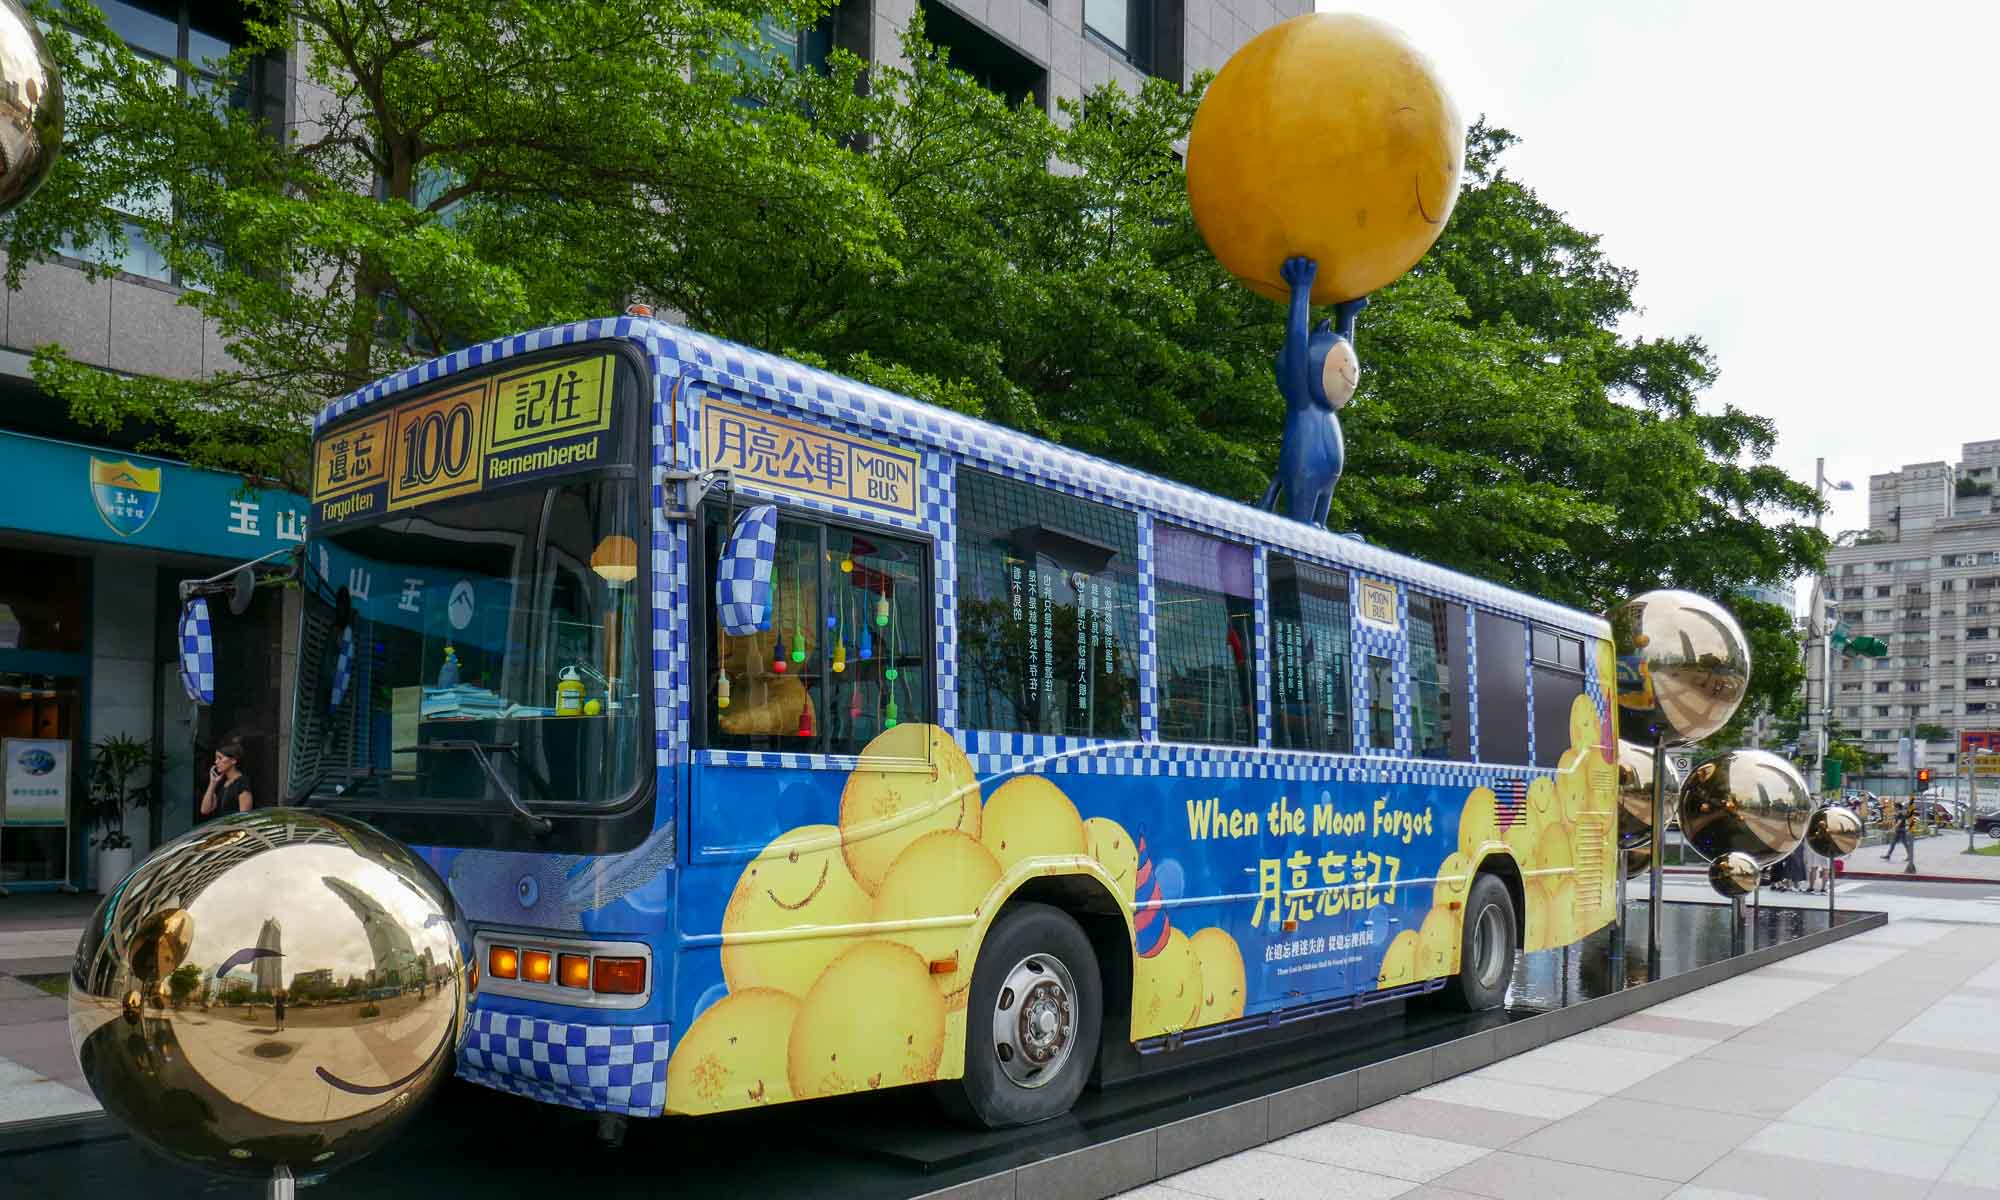 The 'When the moon forgot' bus, based on a children's book written by Taiwanese author Jimmy Liao